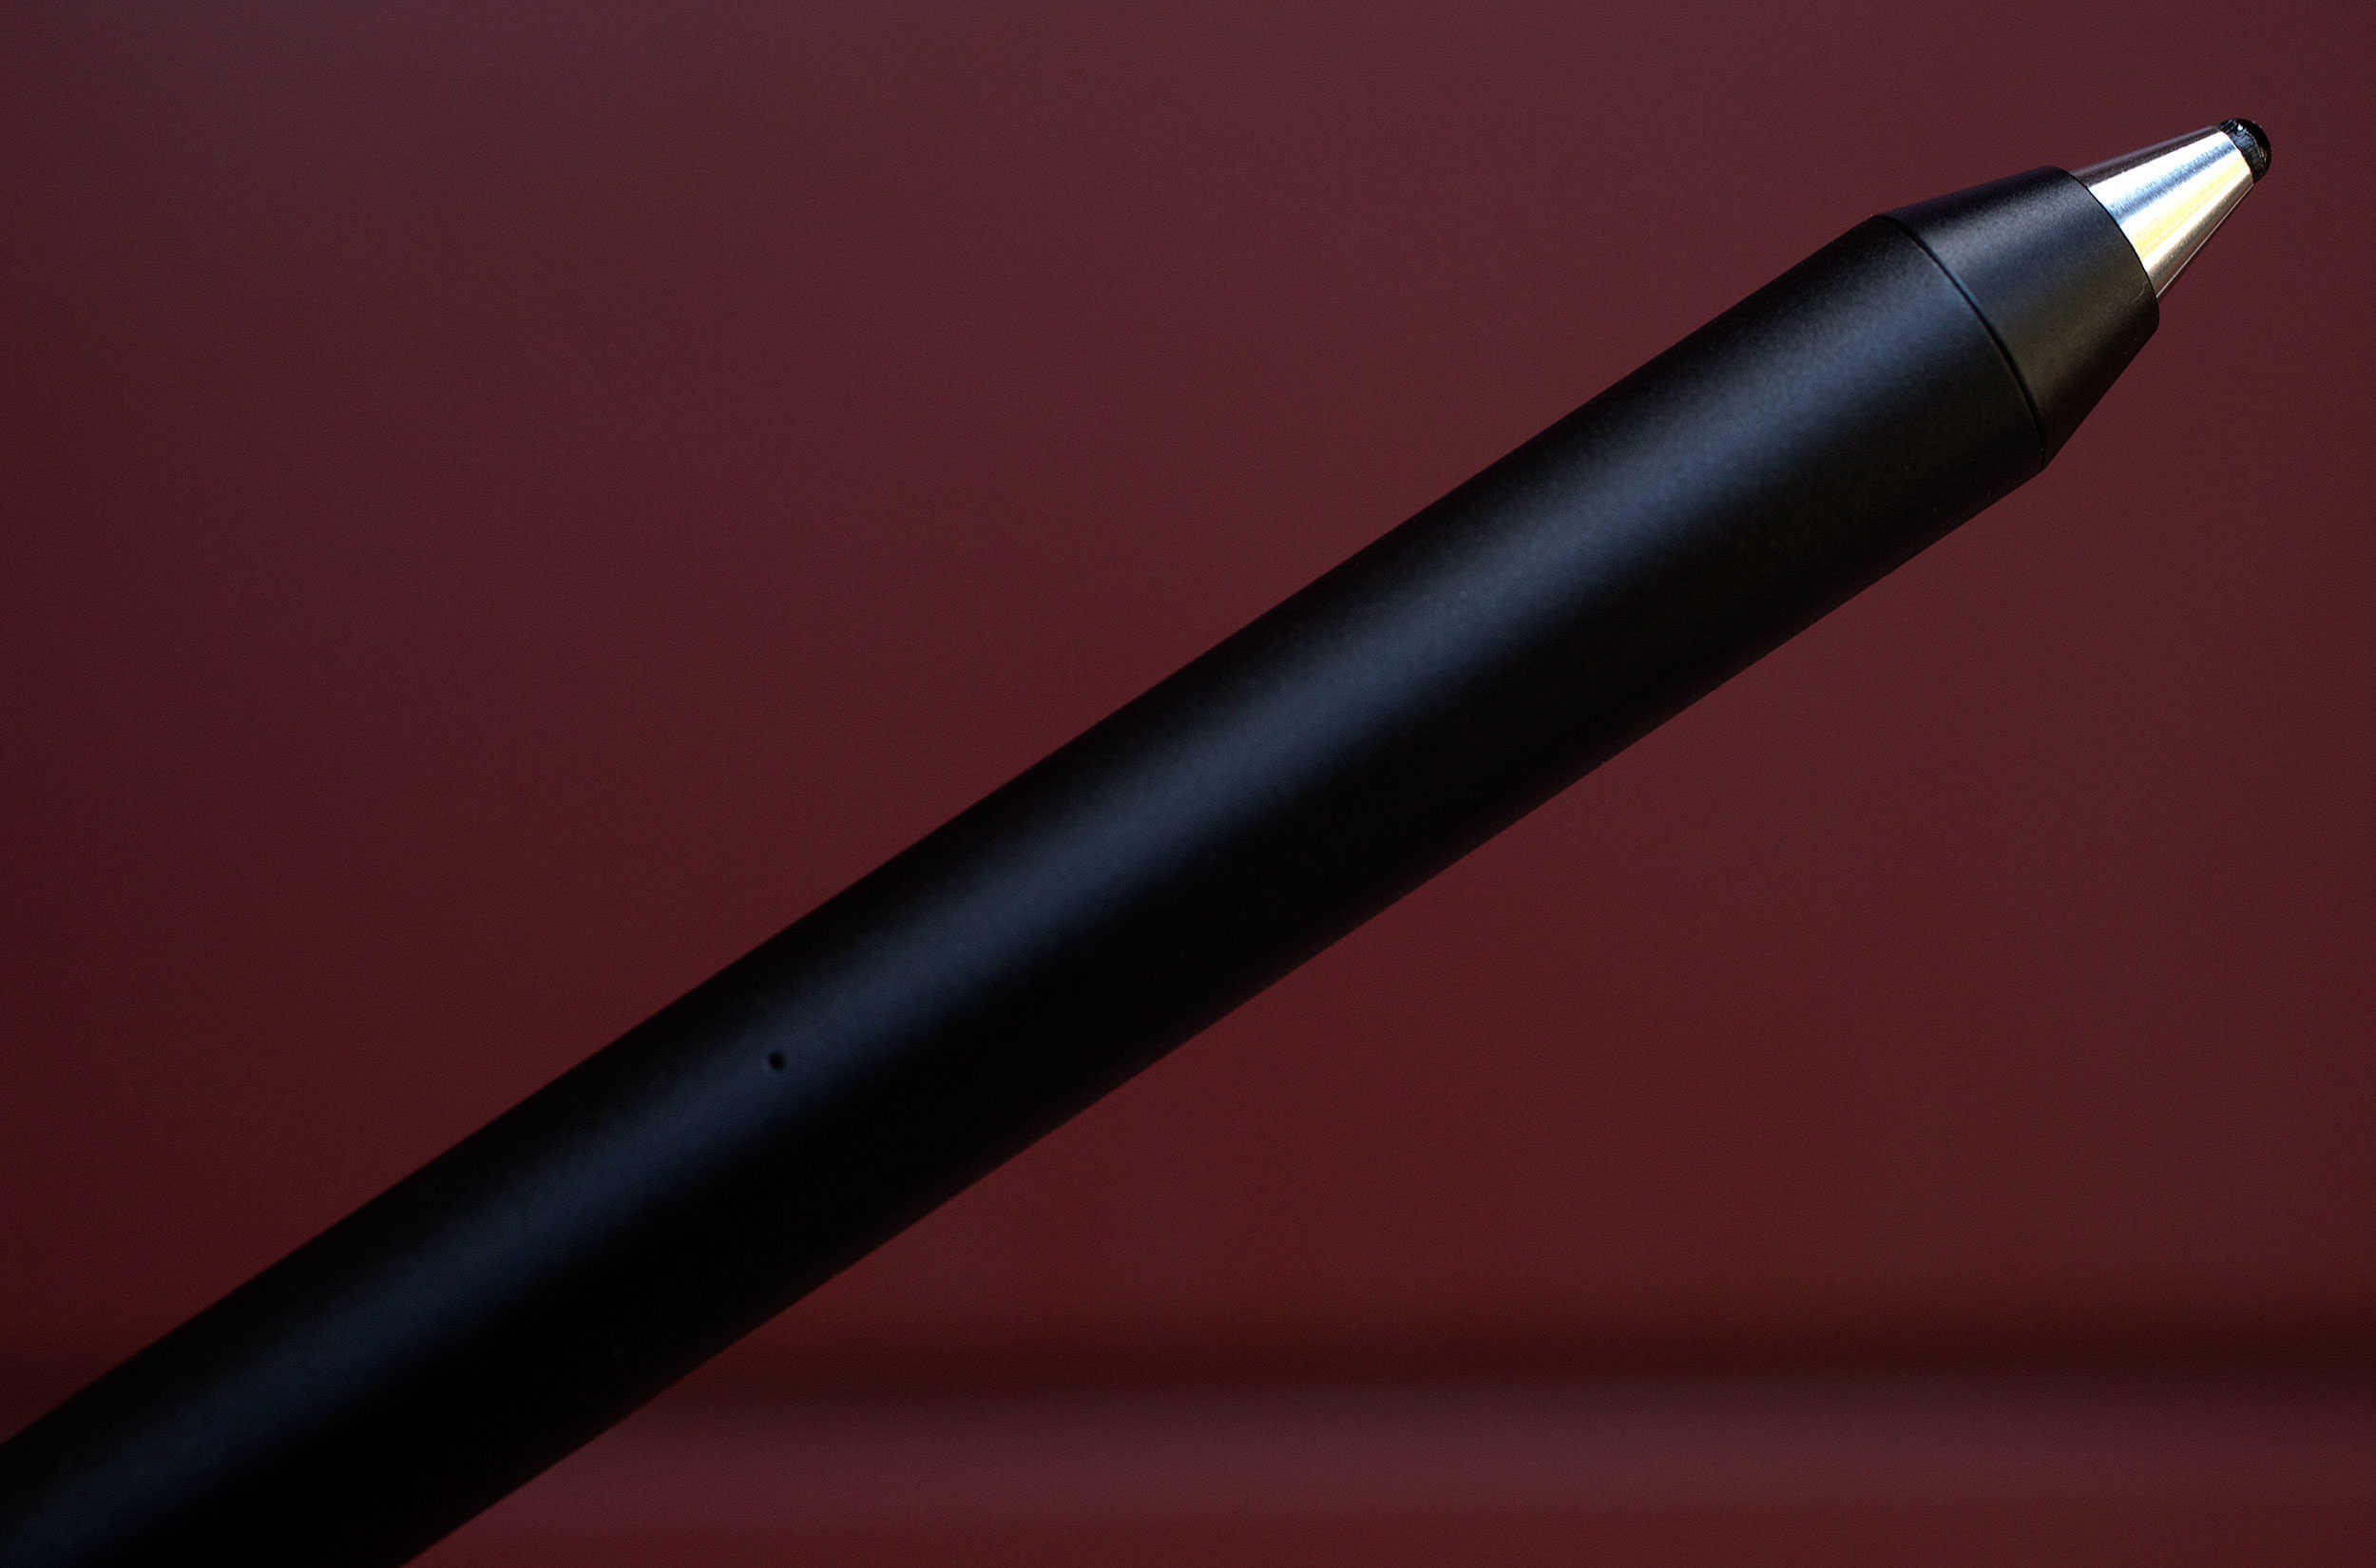 The new Jot Dash stylus works anywhere your finger does.